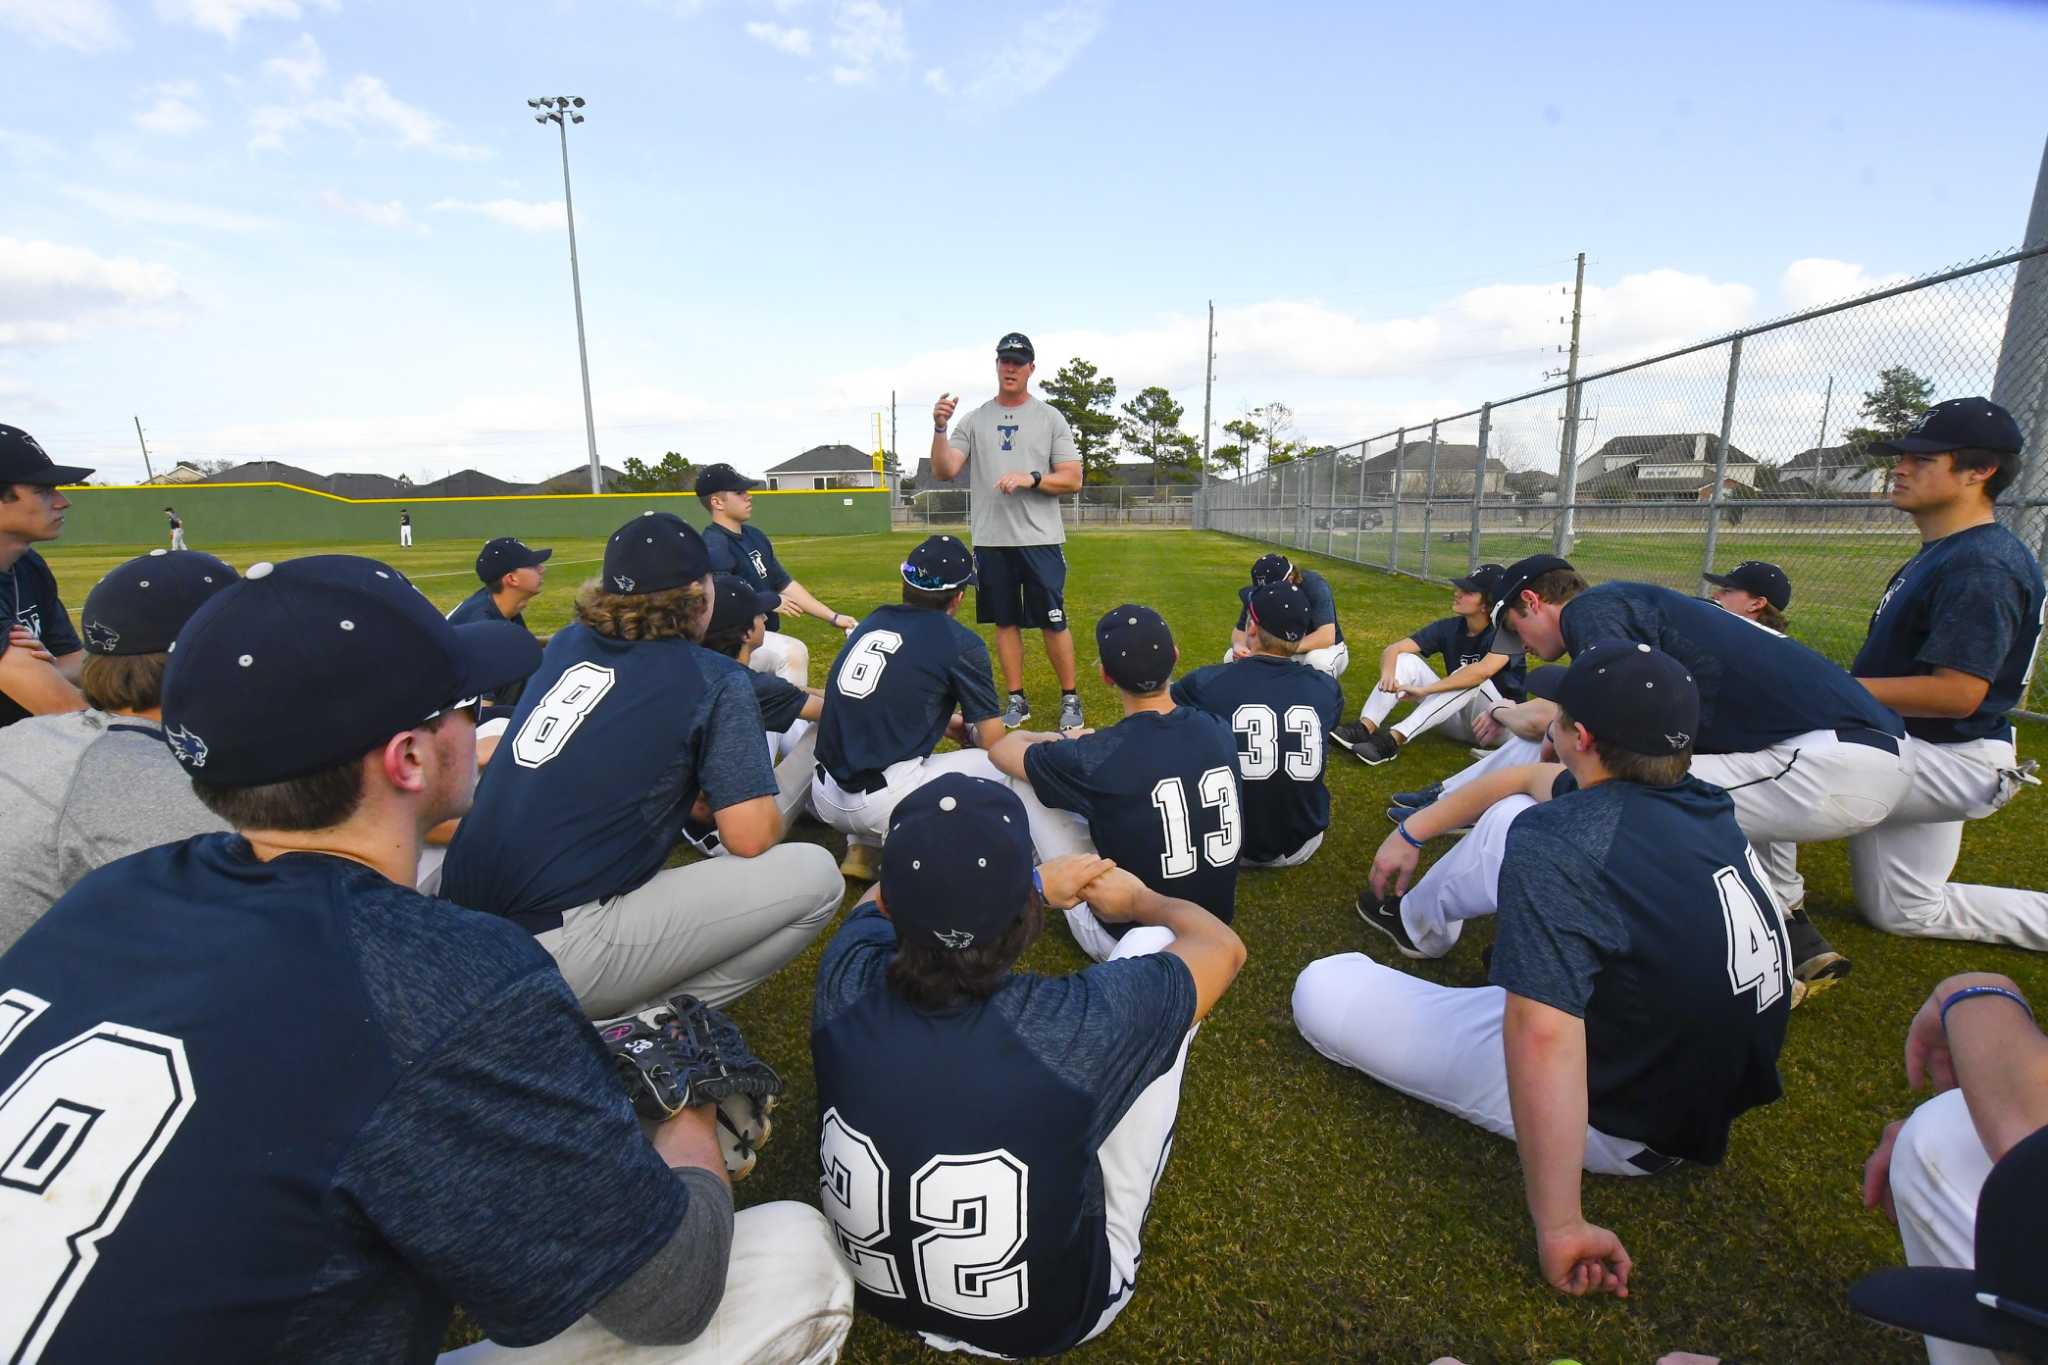 Tomball Memorial baseball moves forward after team ‘turned it around’